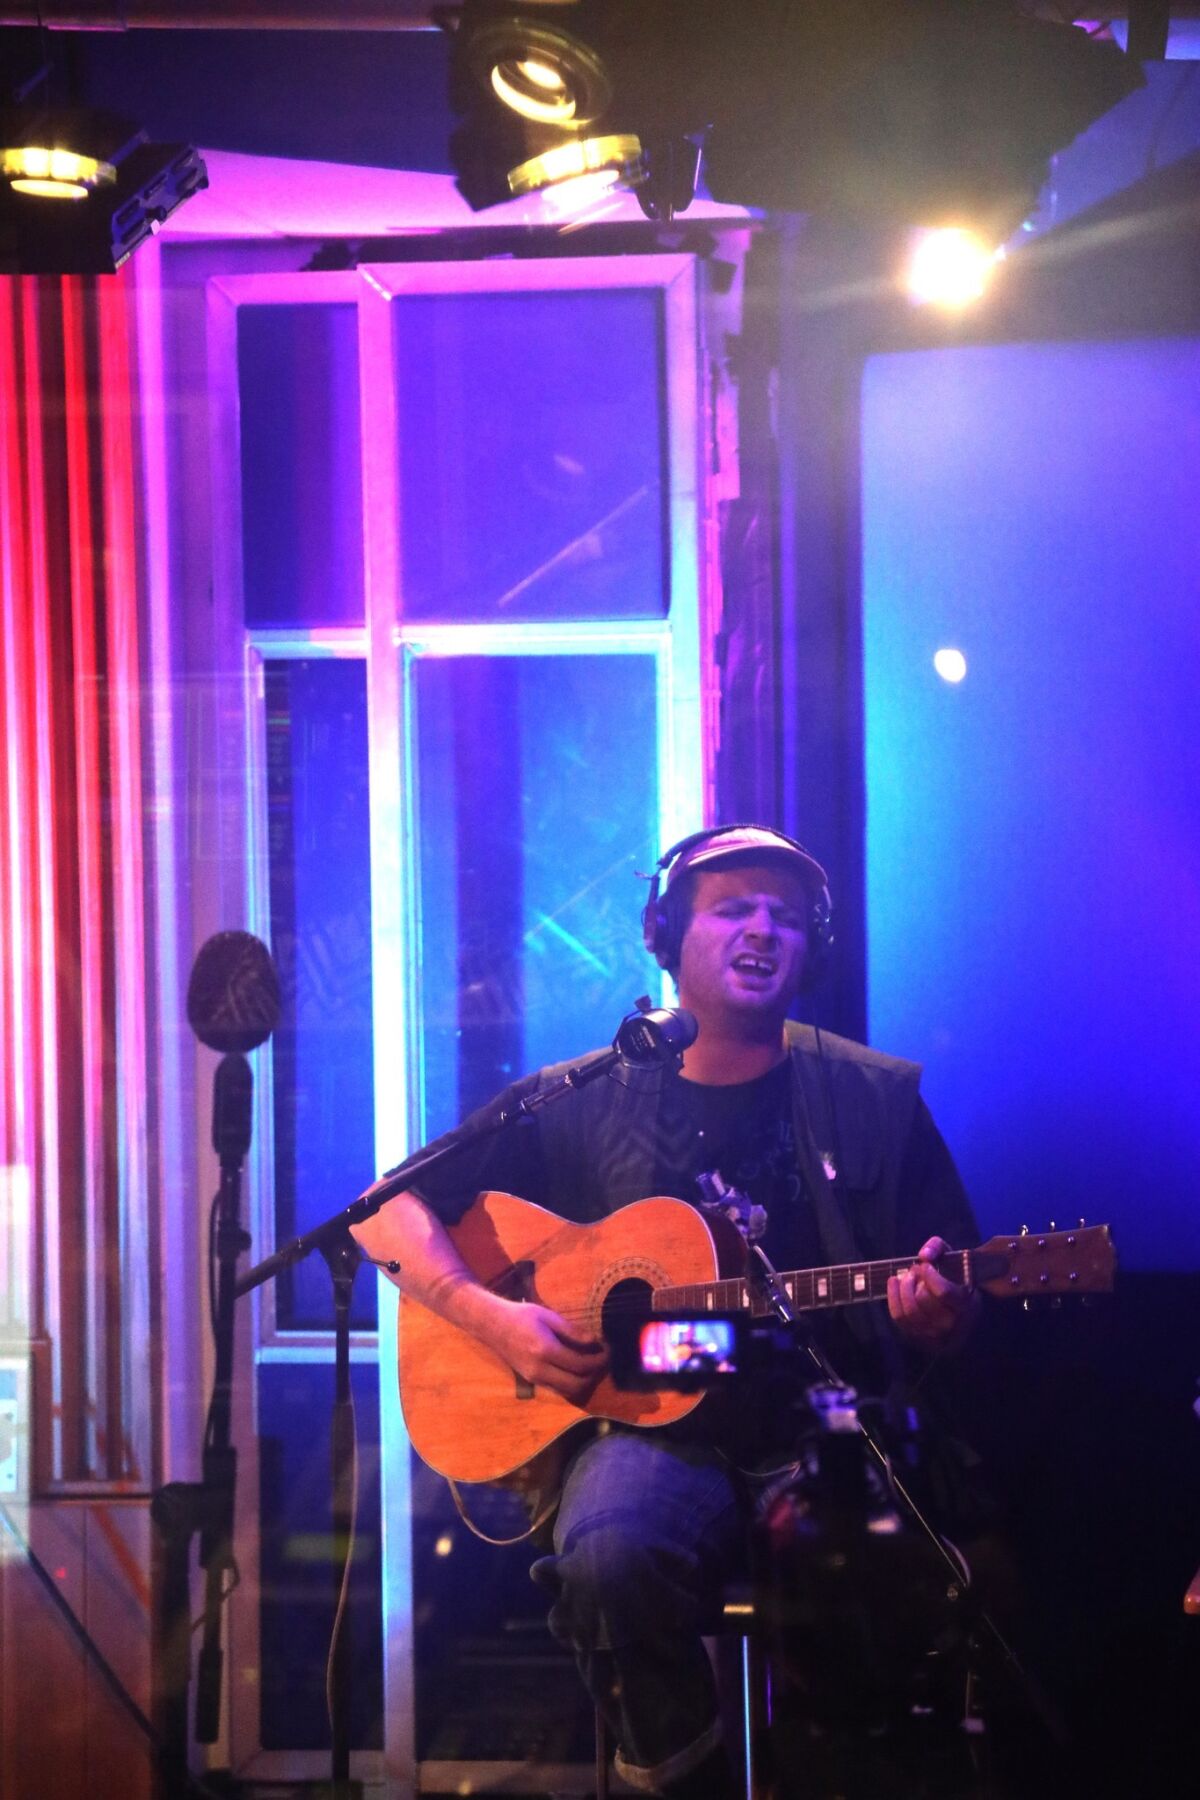 Singer Mac DeMarco gives a live performance on "Morning Becomes Eclectic," at KCRW on Nov. 8, 2018.